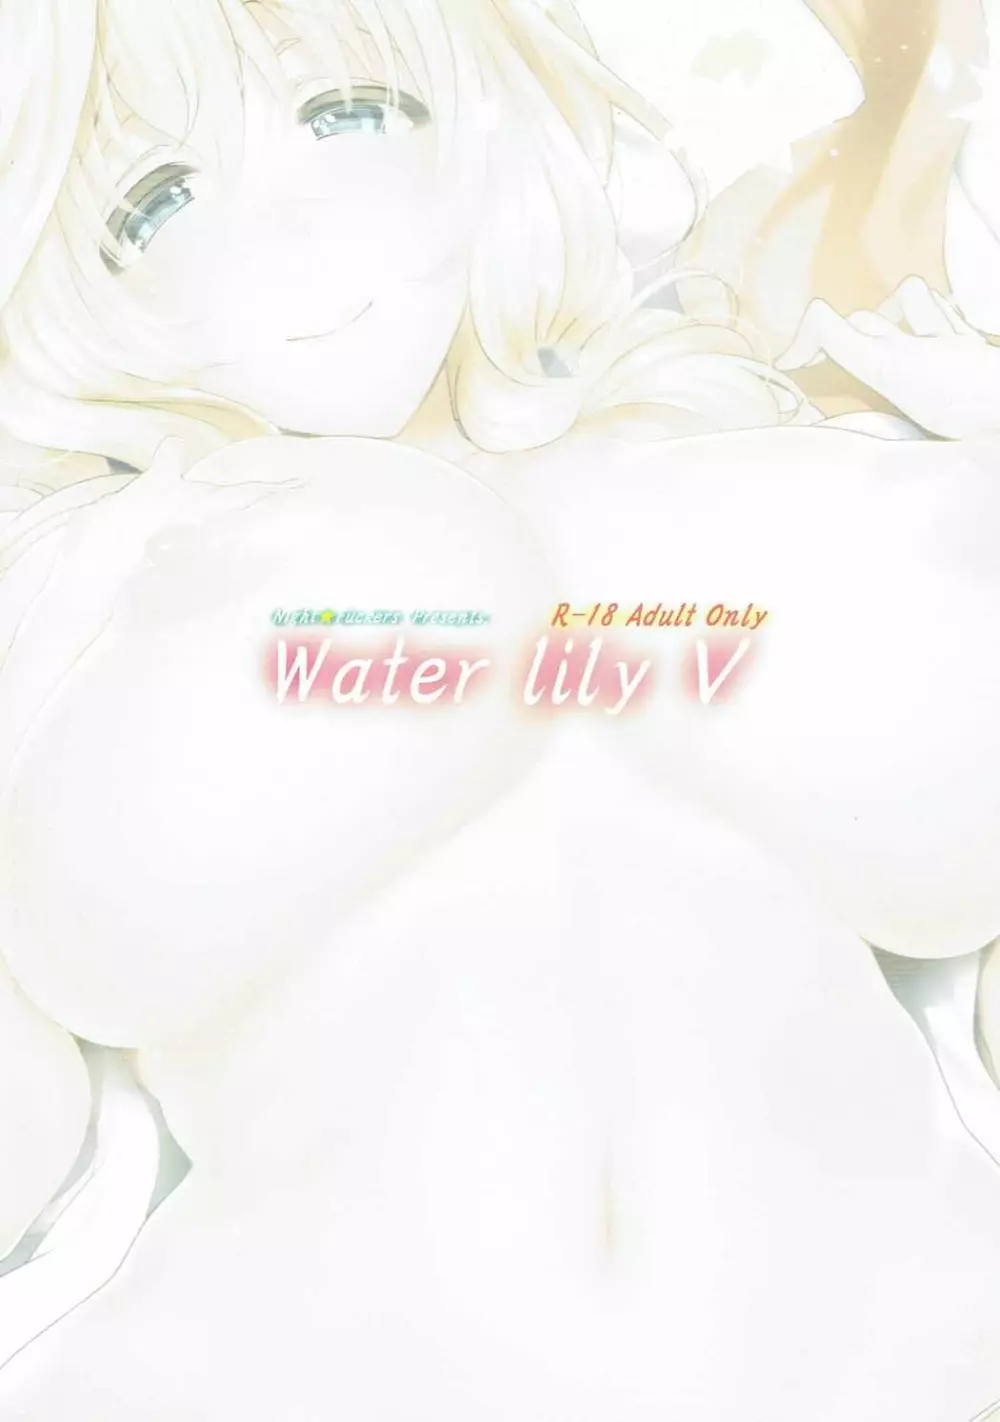 Water lily V 40ページ